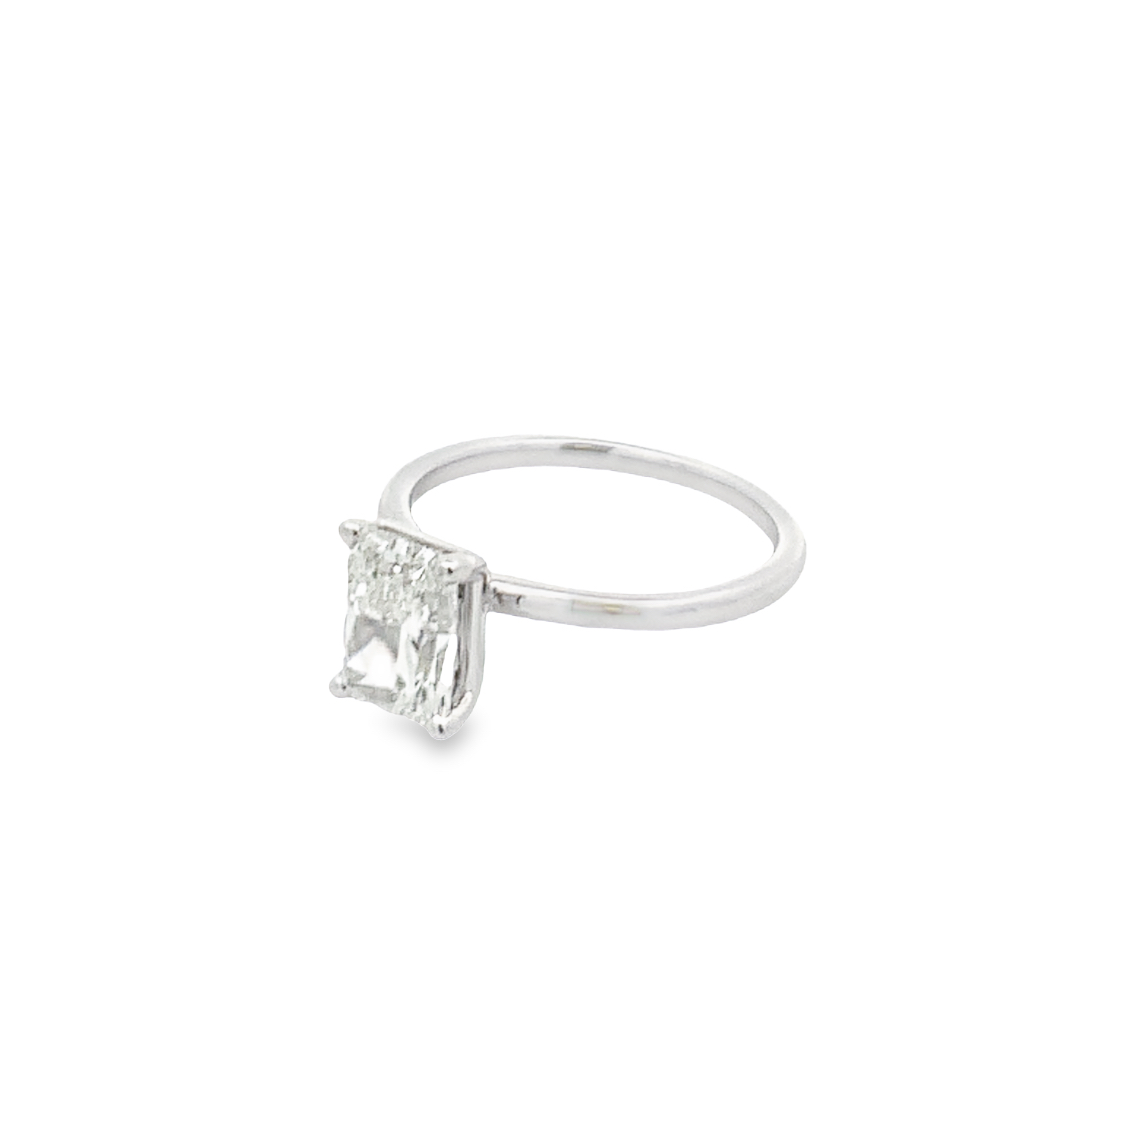 14K White Gold Solitaire Engagement Ring with 1 Lab Grown Radiant Cut Diamond 2.01 Cts F VS1 IGI LG538298627